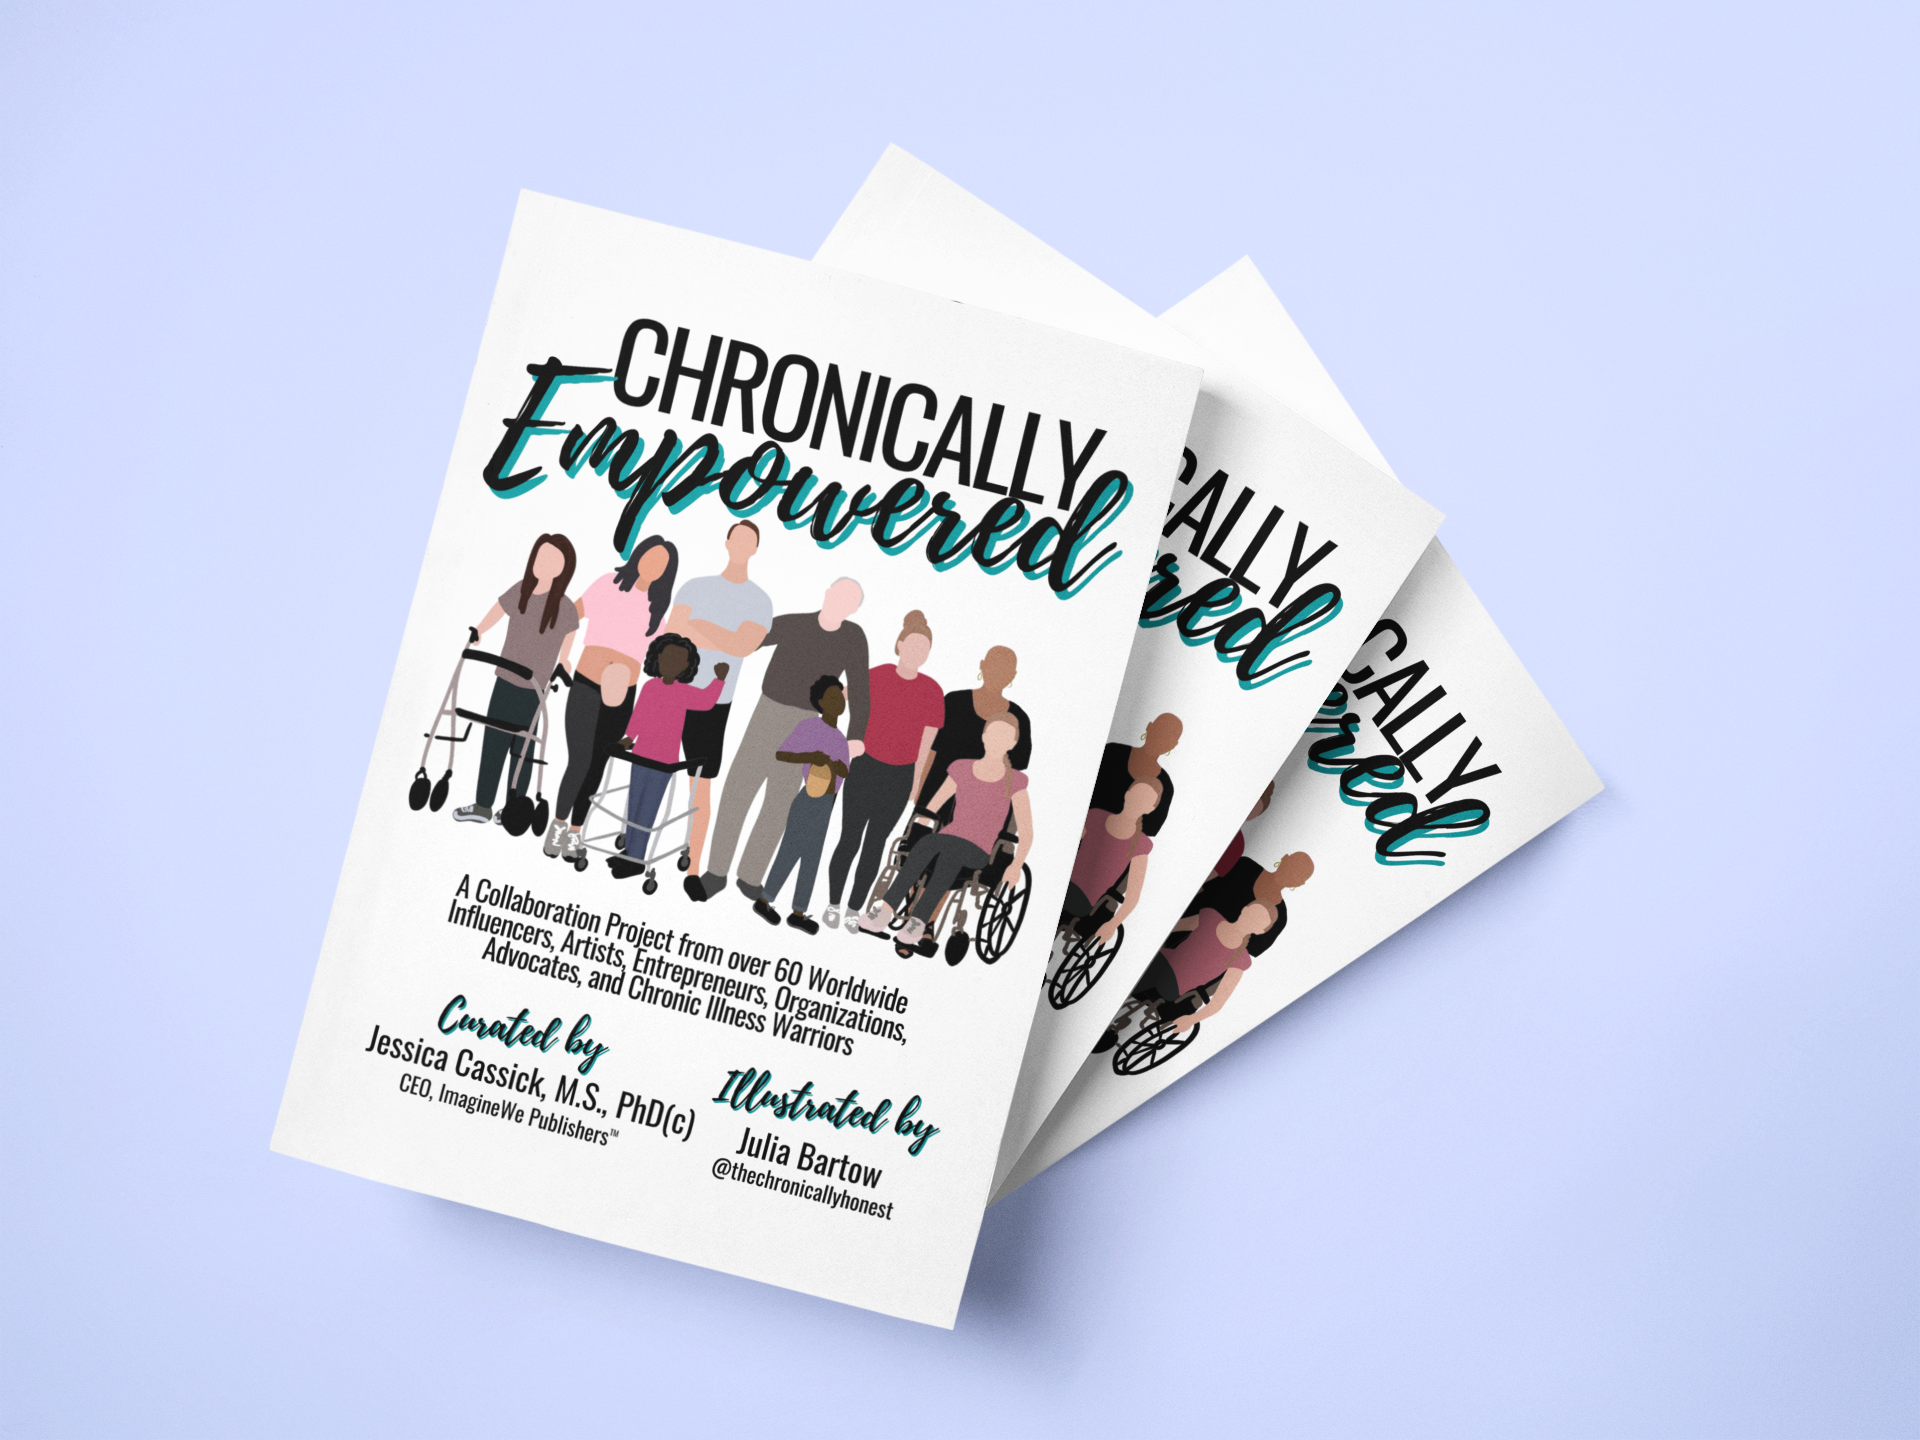 Chronically Empowered WHOLESALE